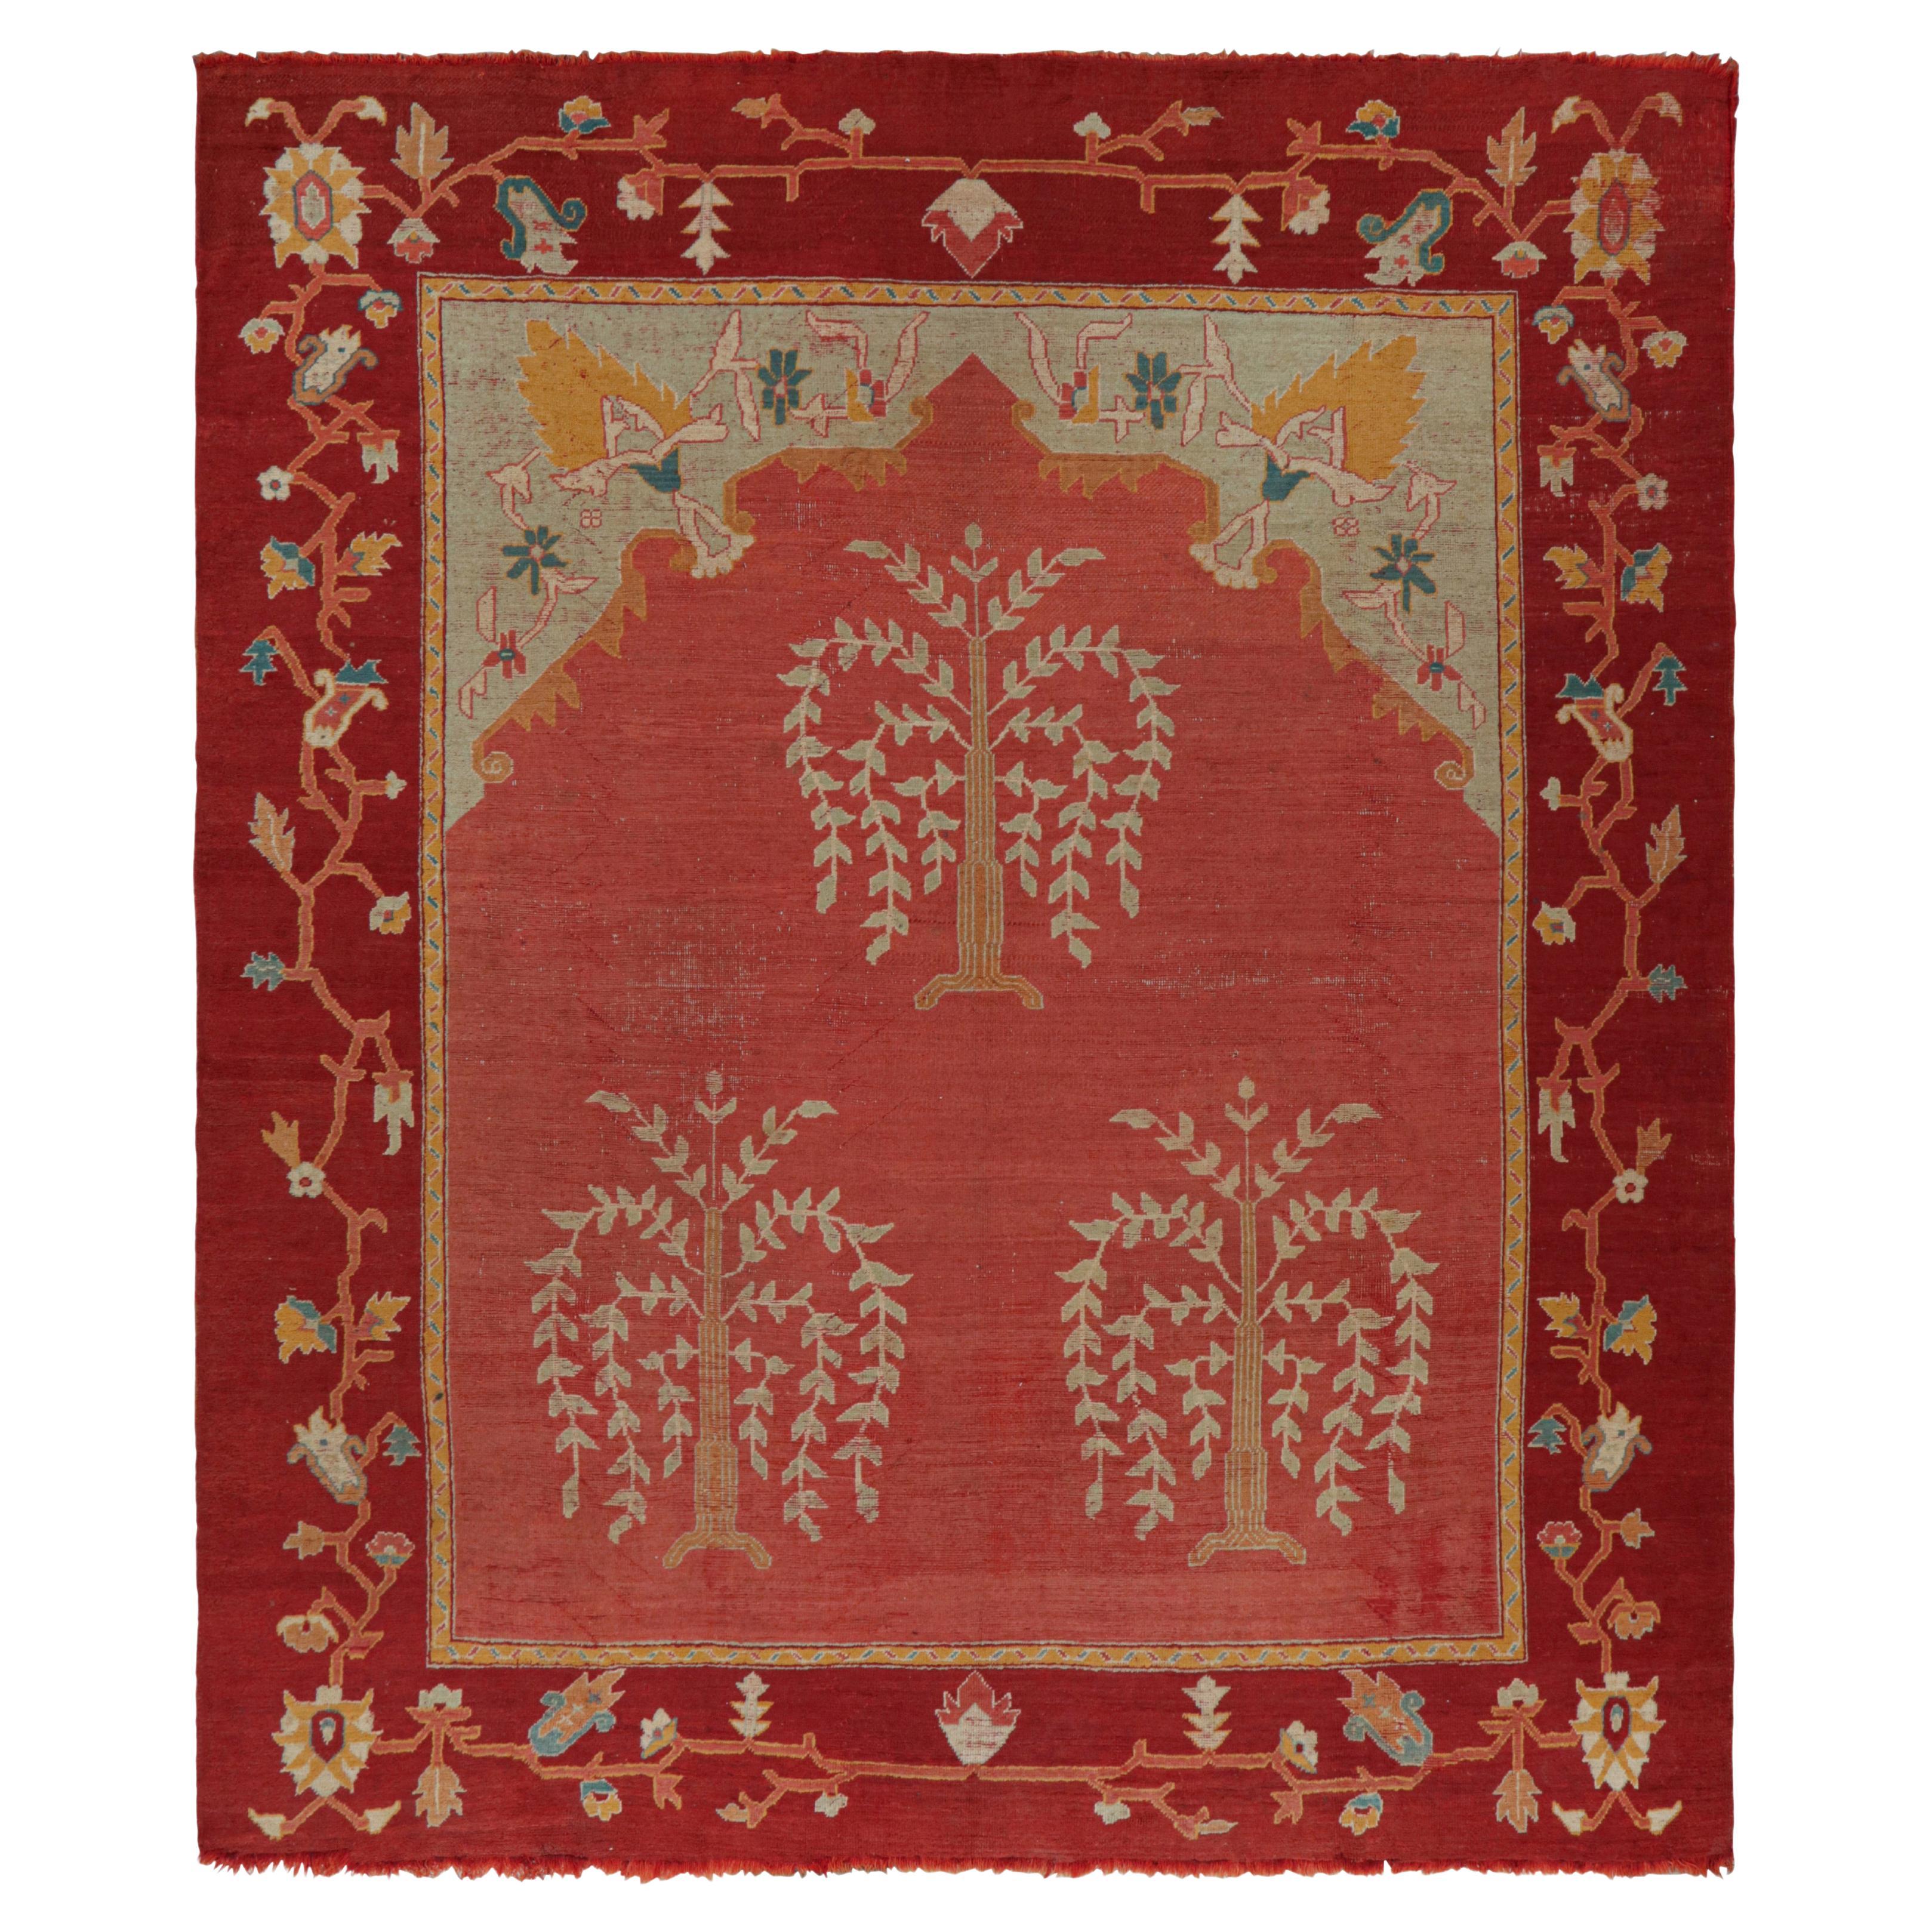 Antique Oushak Rug in Red with Floral Medallions